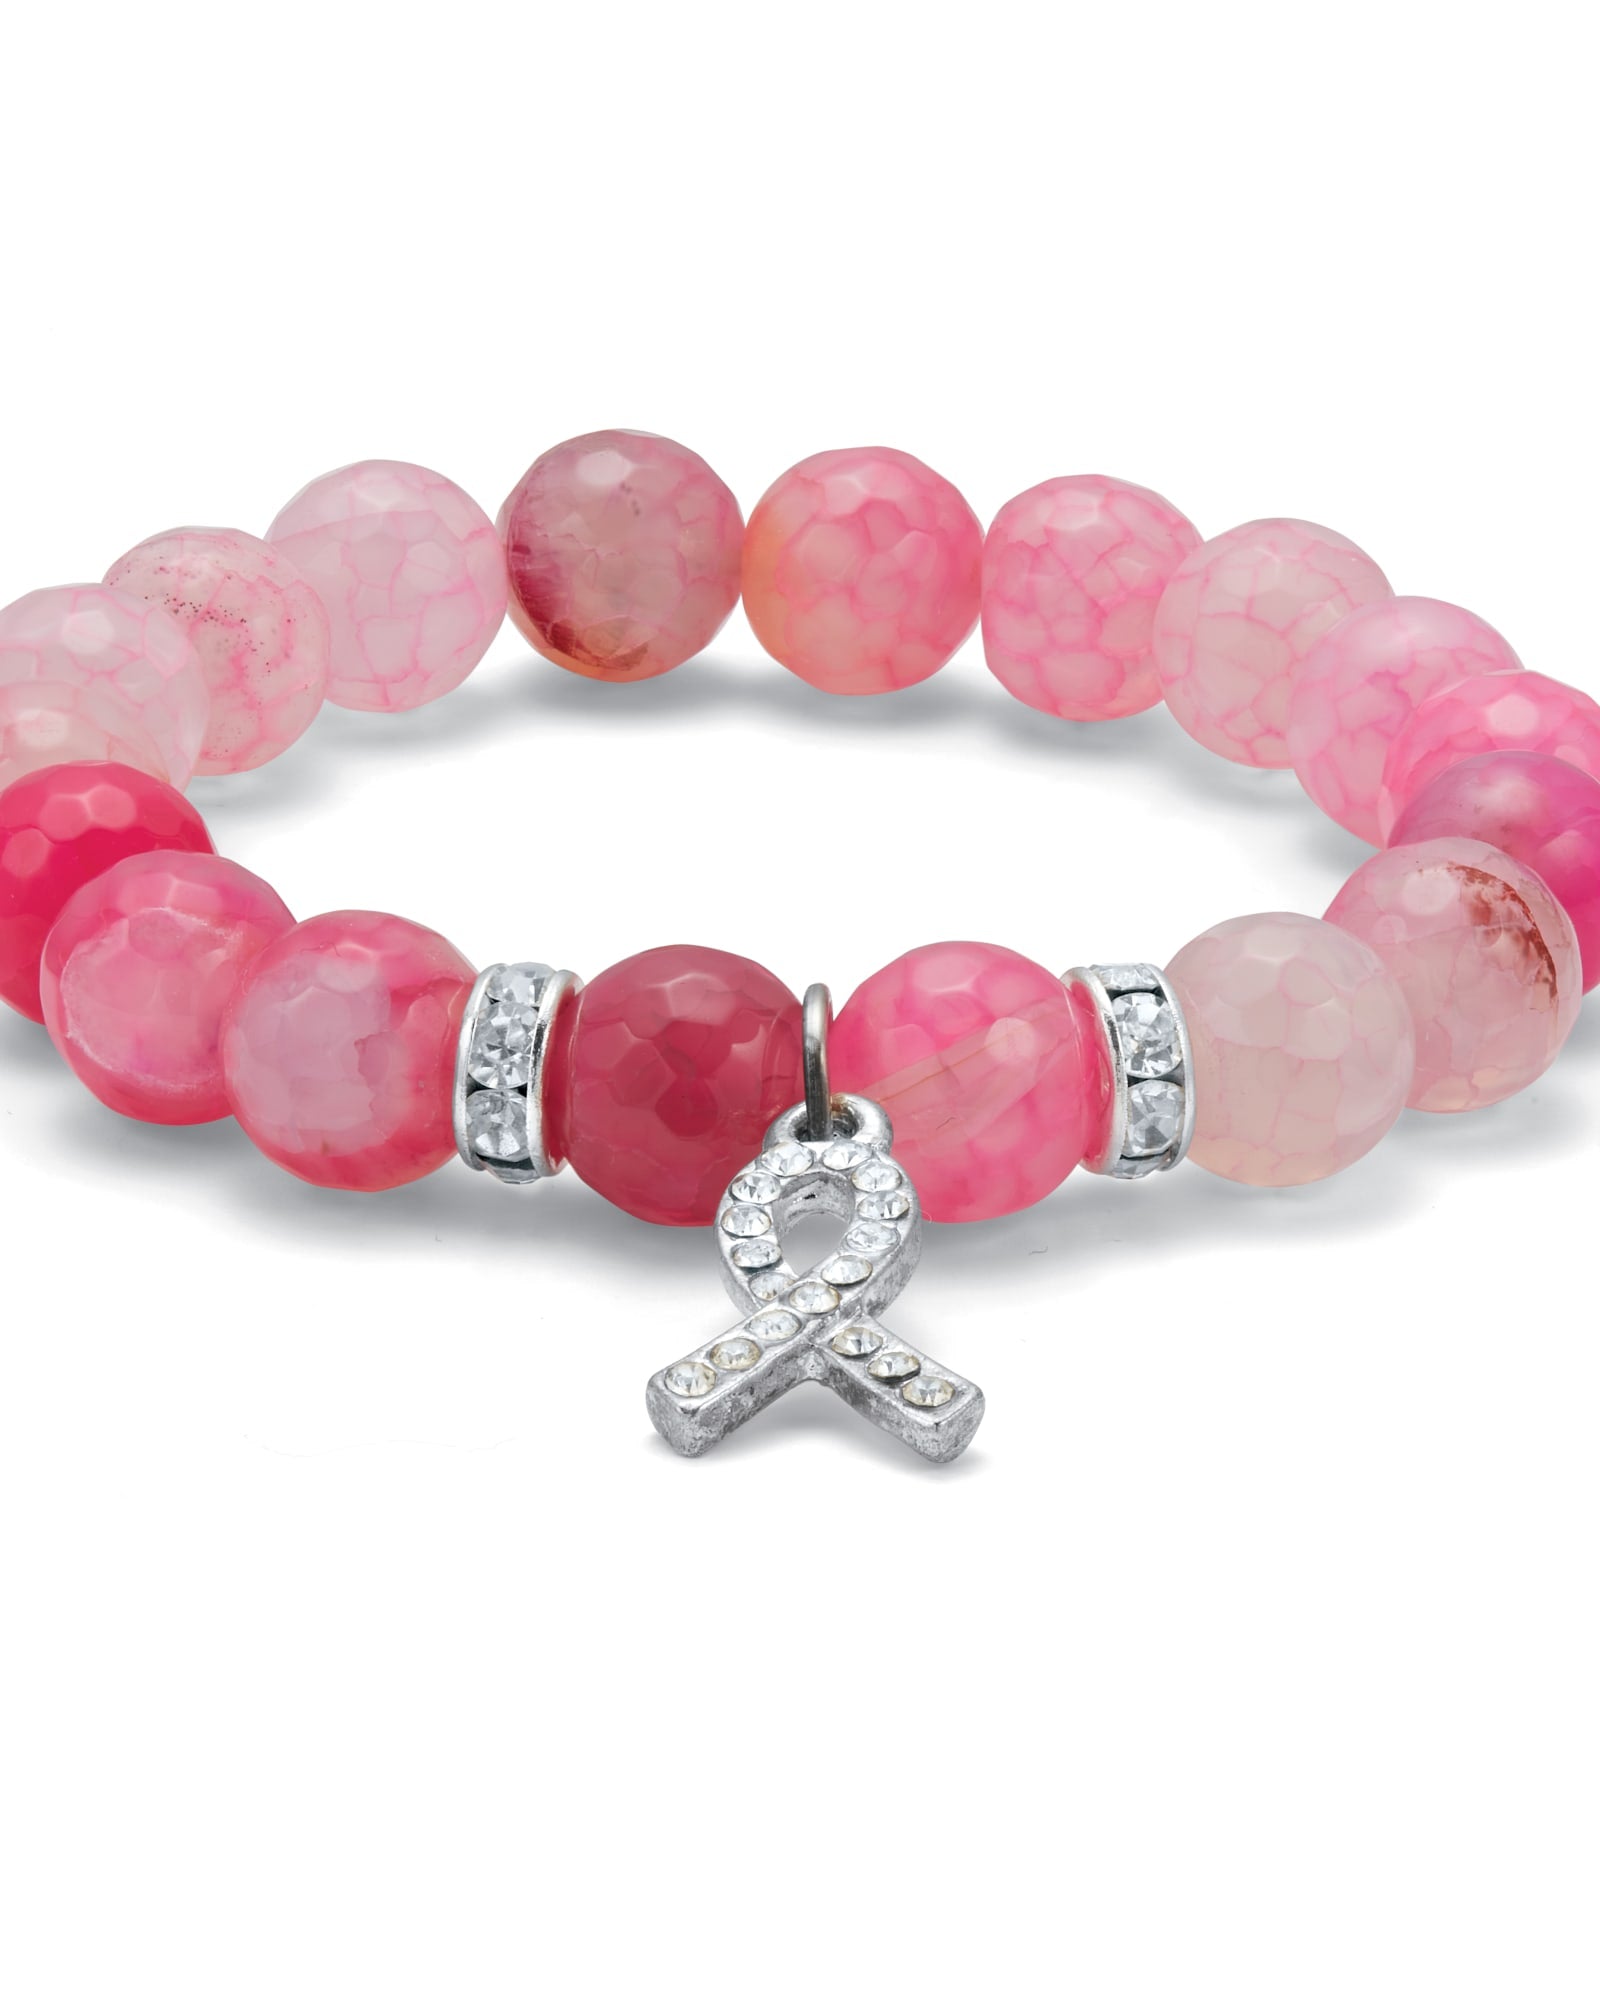 Crystal Accented Beaded Breast Cancer Awareness Stretch Bracelet, 7 Inch | White